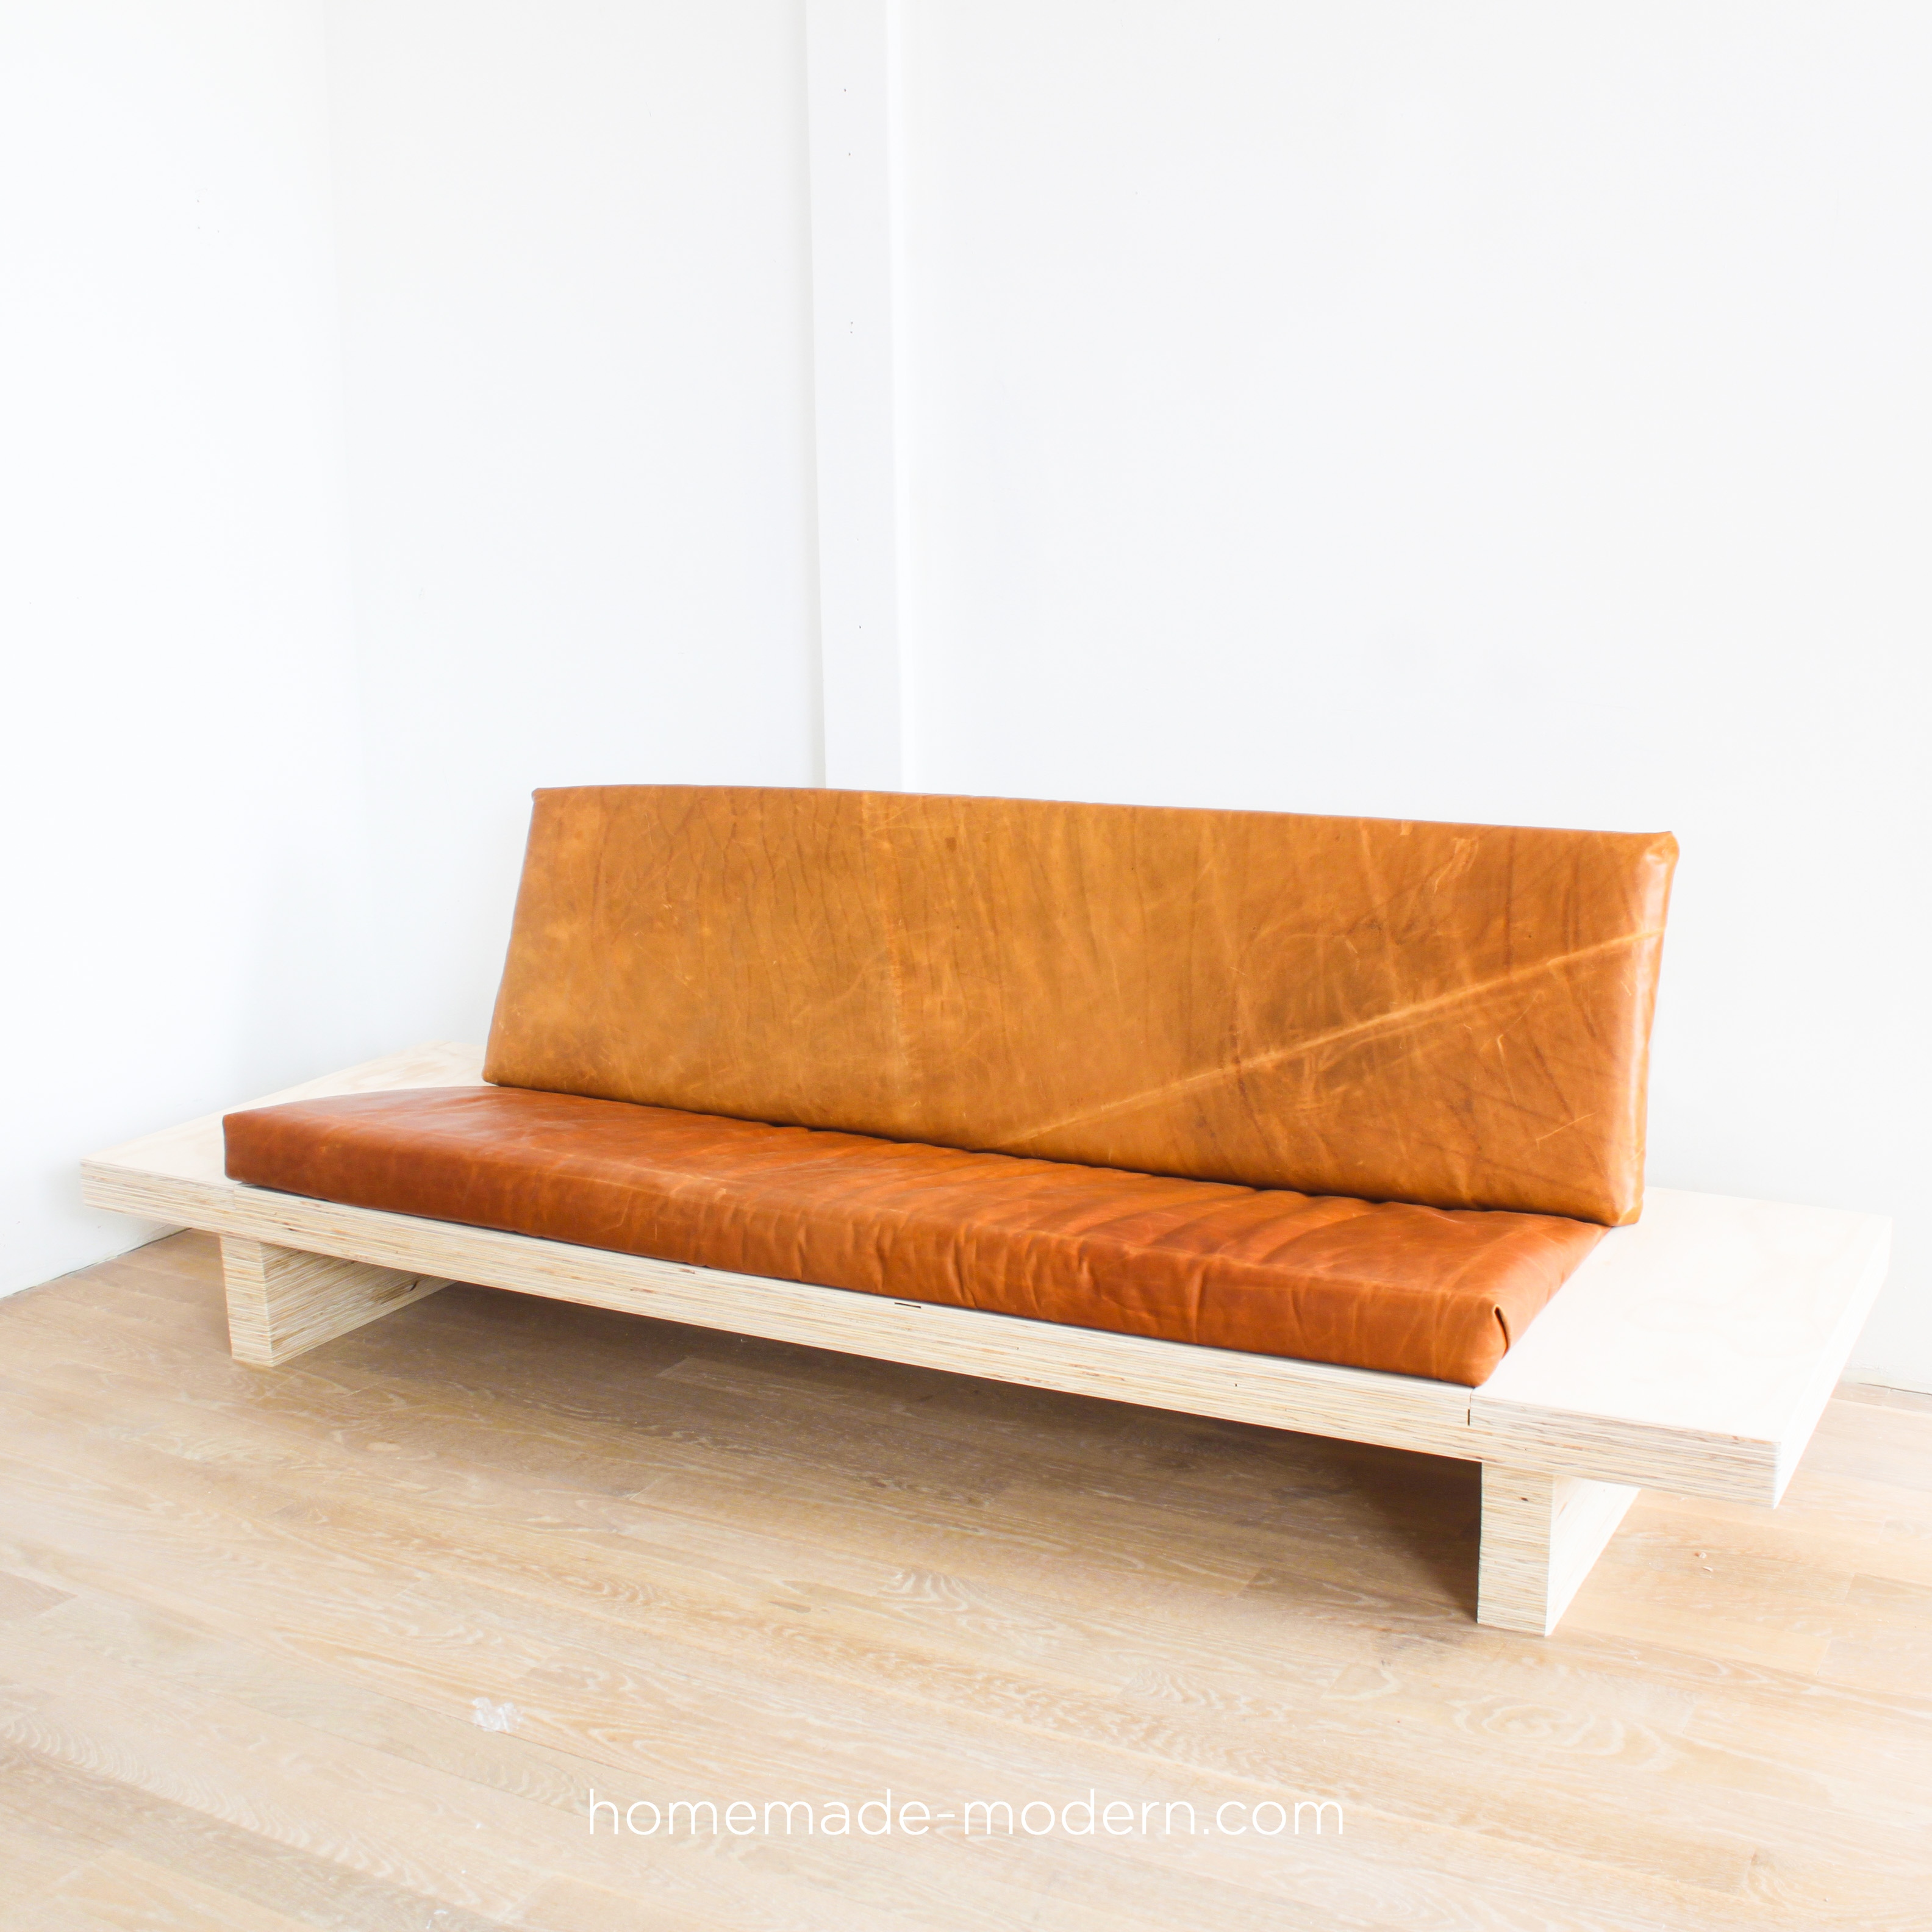 This DIY modern plywood sofa is made out of 2-1/2” sheets of ¾” plywood from Home Depot. Full instructions can be found at HomeMade-Modern.com